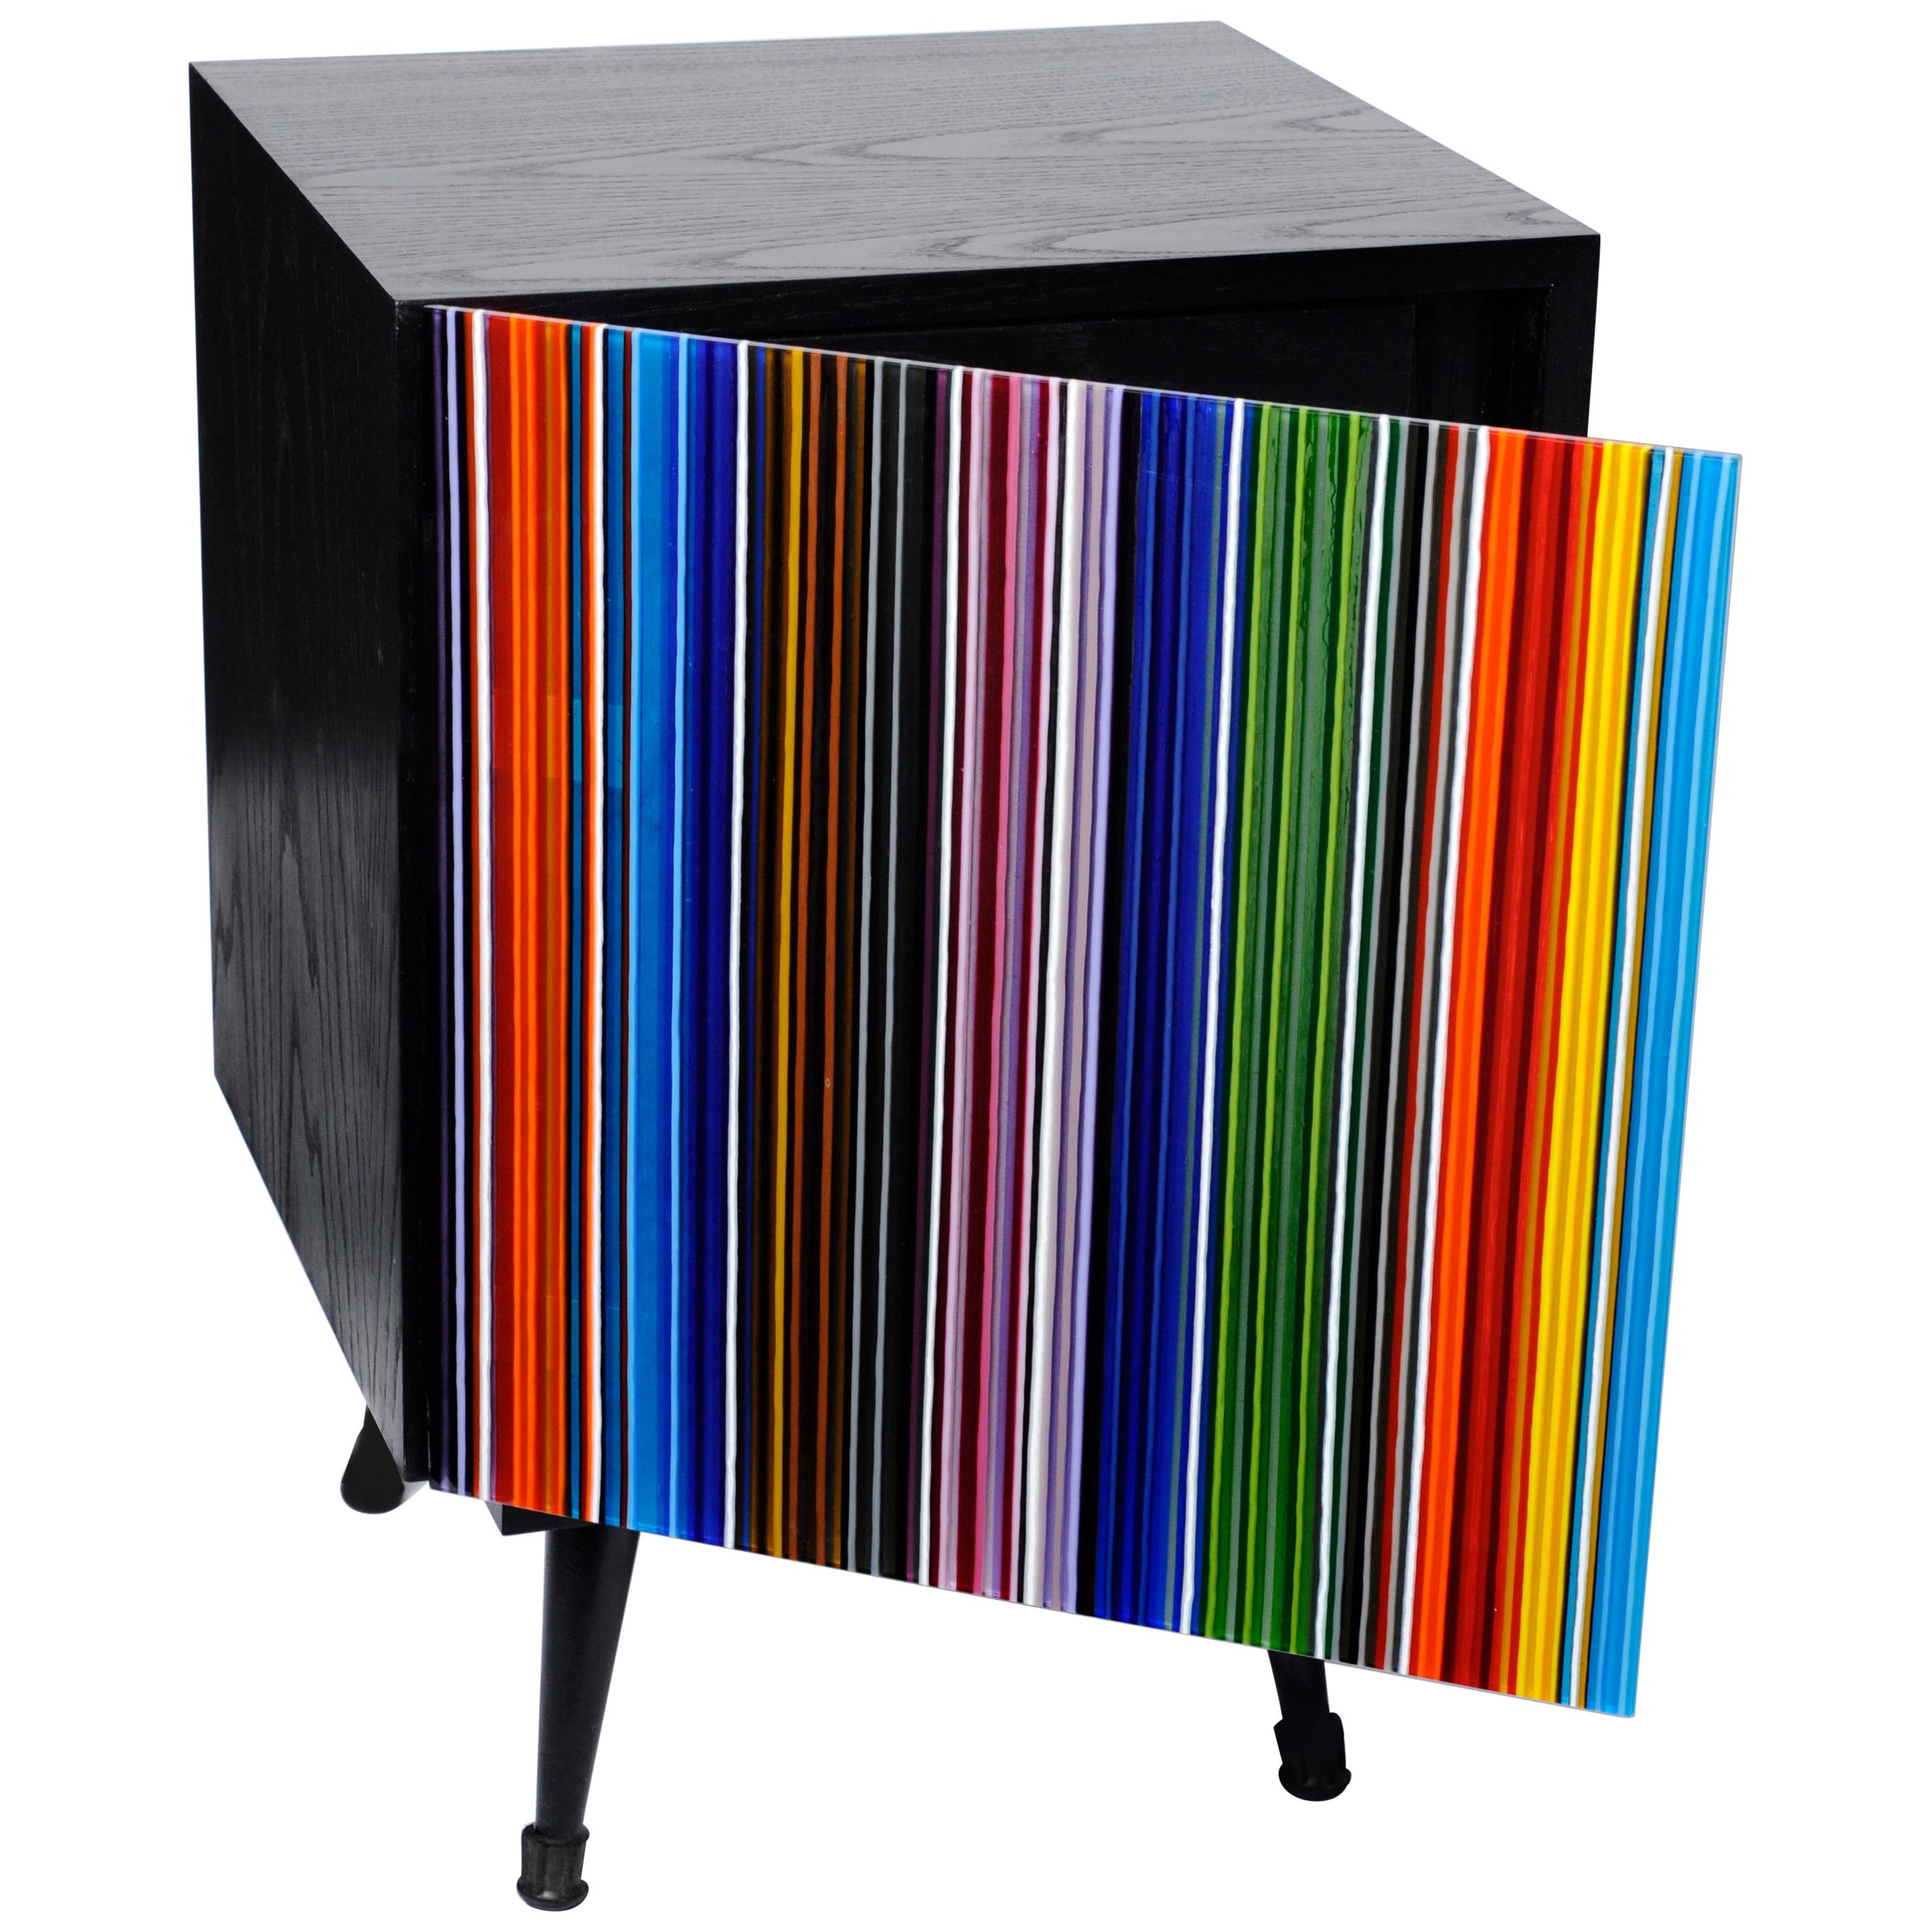 Nightstand Barcodes Multicolored Glass Door For Sale